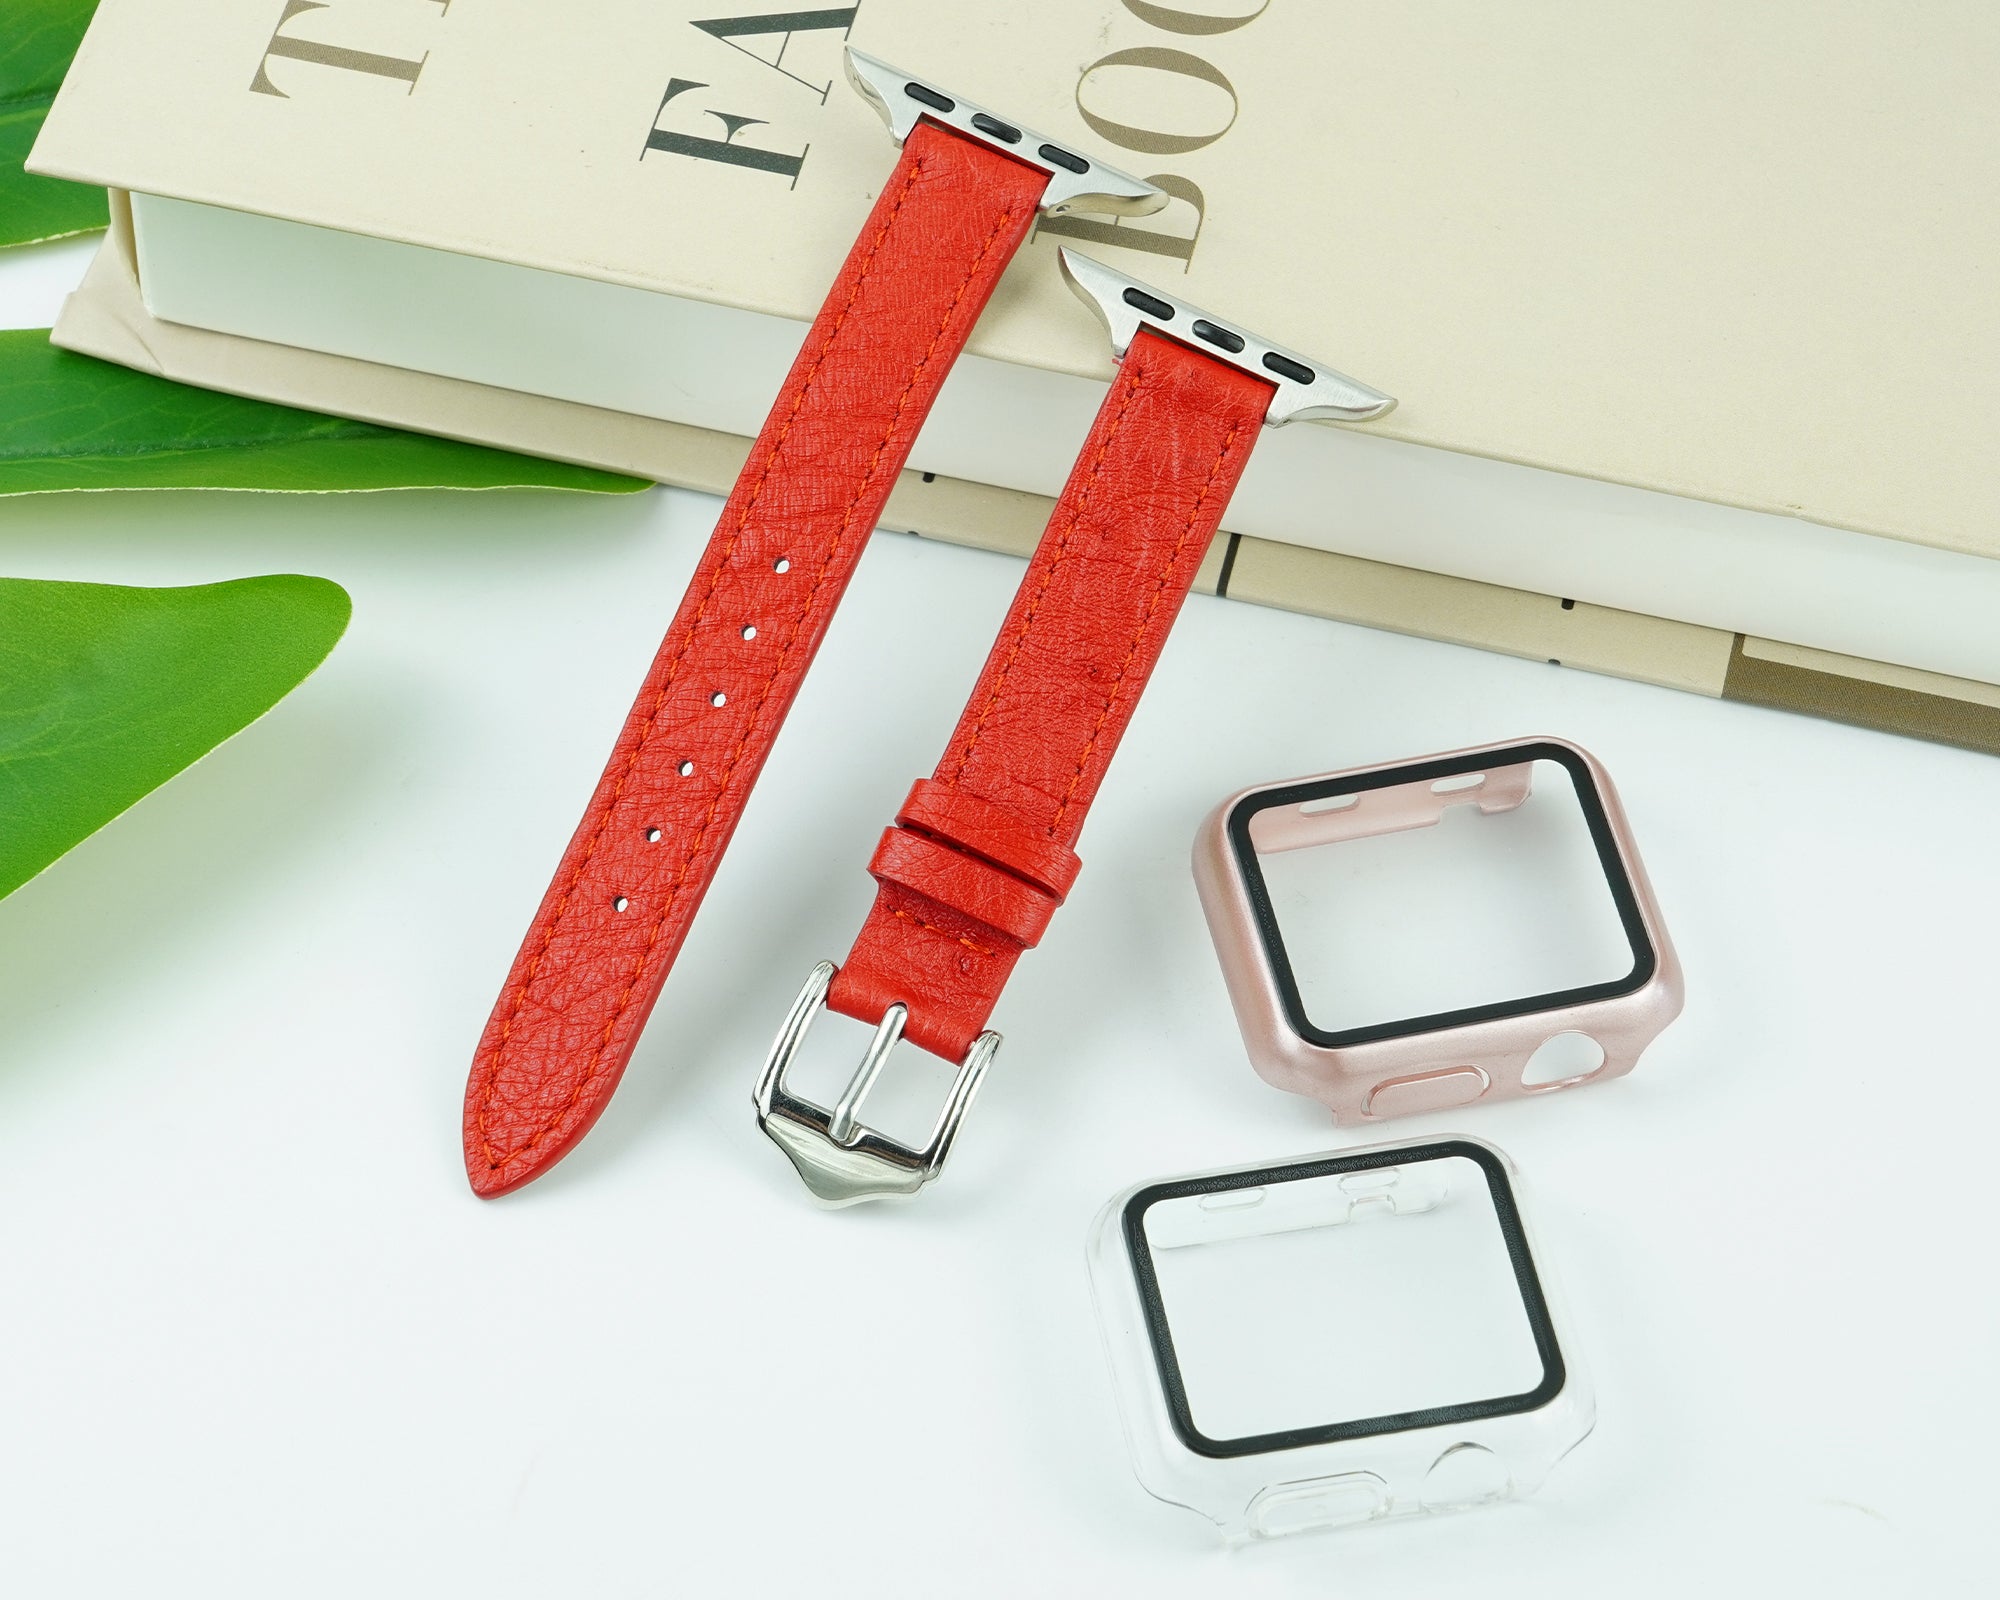 Red Flat Ostrich Leather Band Compatible Apple Watch Iwatch 38mm Screen Protector Case Silver Adapter Replacement Strap For Smartwatch Series 1 2 3 Leather Handmade AW-190S-W-38MM